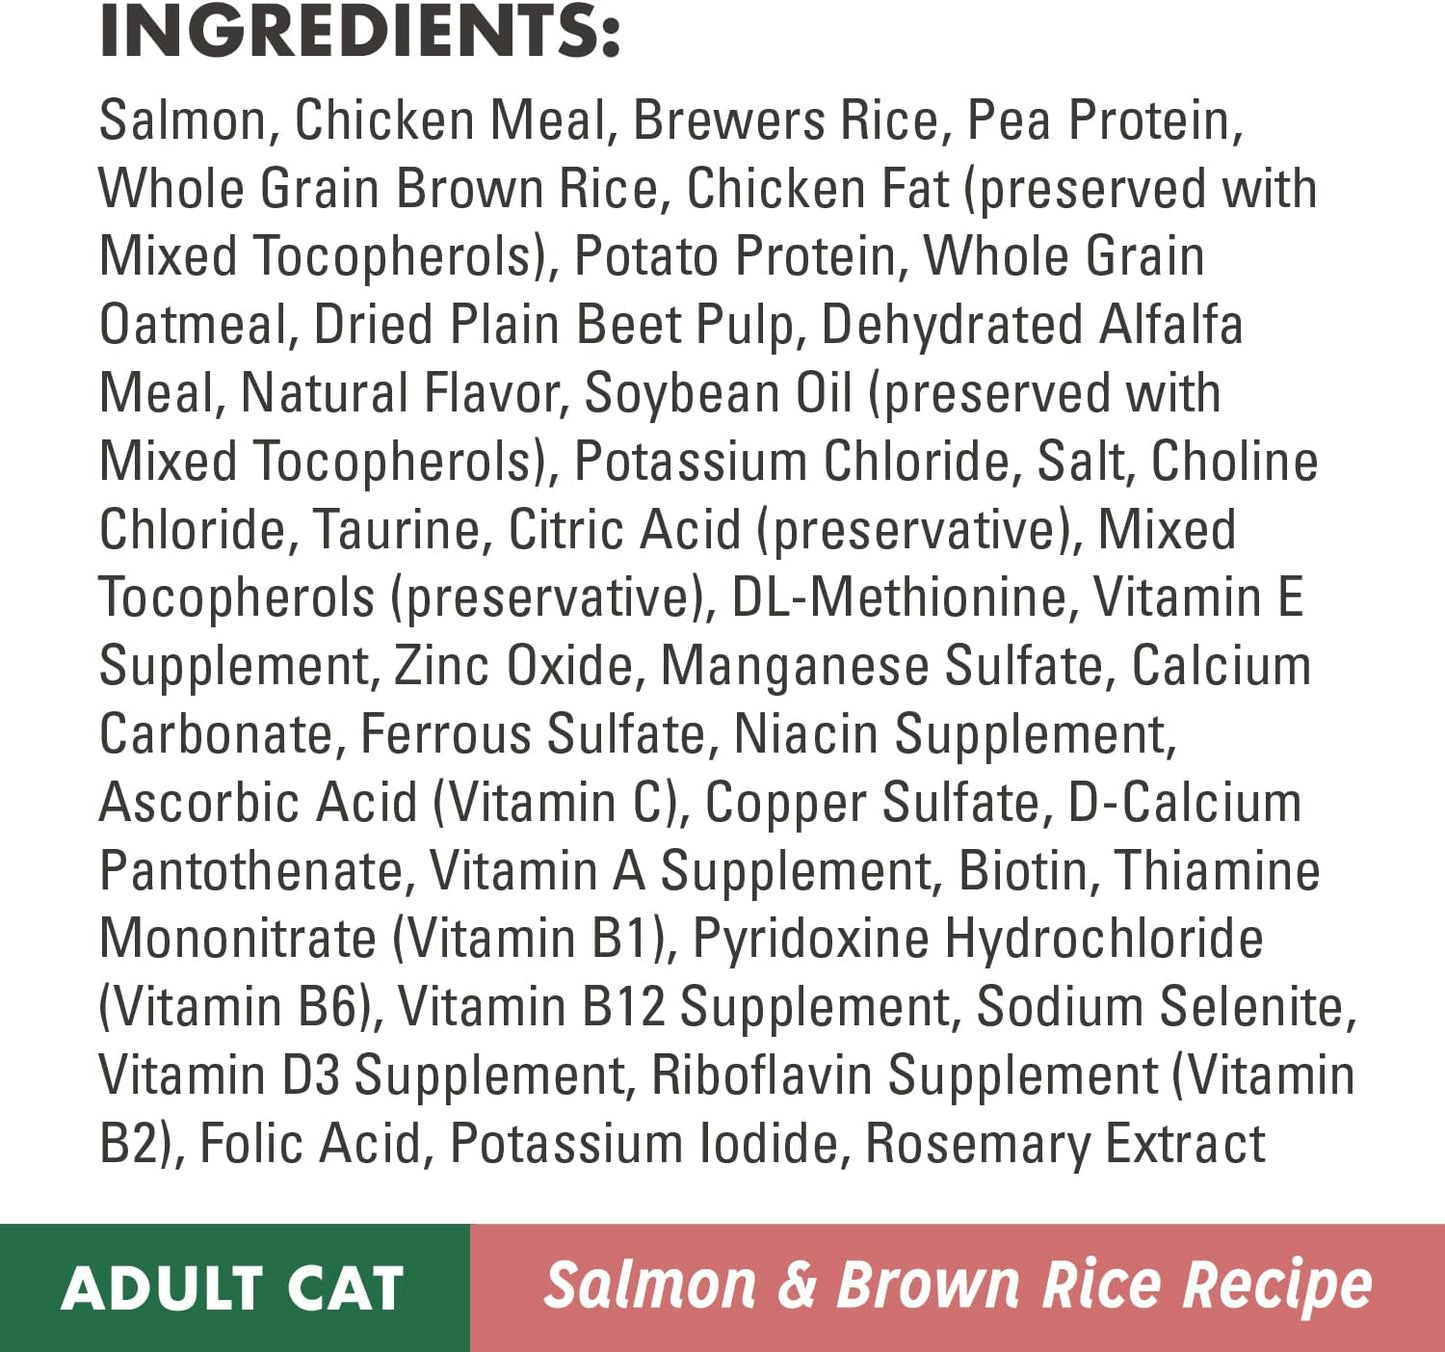 NUTRO WHOLESOME ESSENTIALS Adult Natural Dry Cat Food Salmon & Brown Rice Recipe, 14 Lb. Bag